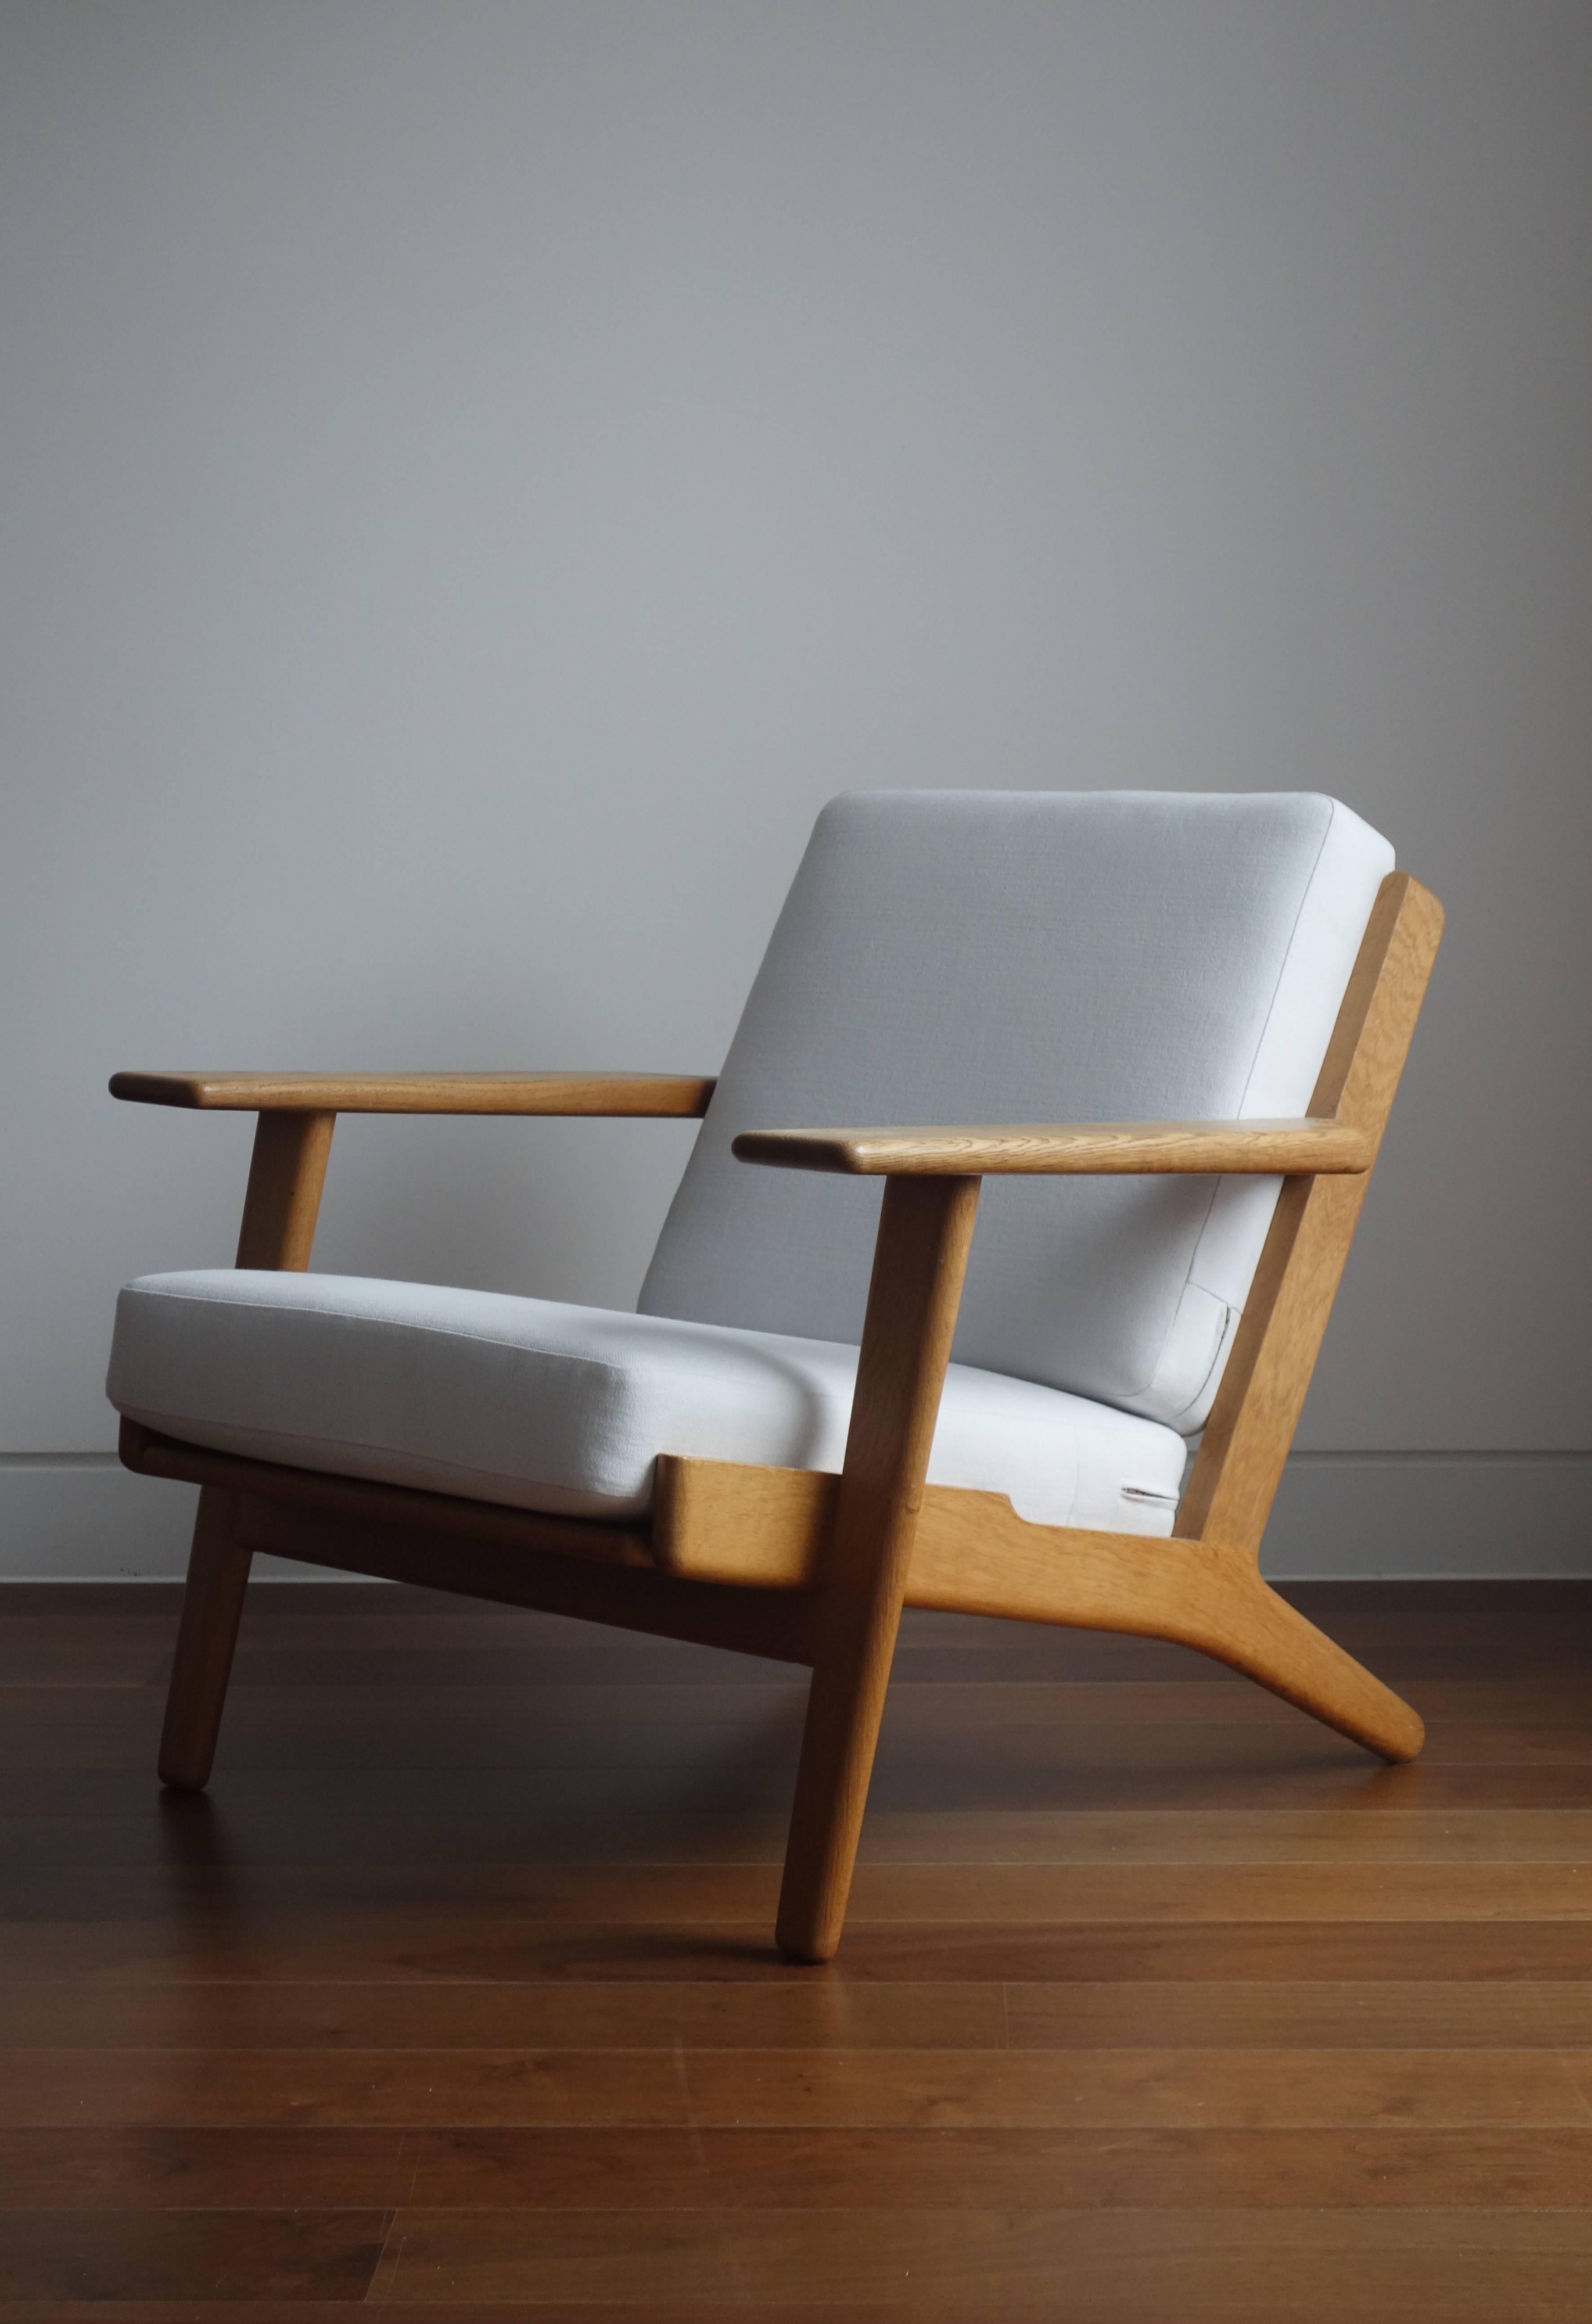 Pair of original Hans J Wegner GE290 lounge chairs.

Single lounge chairs by Hans J. Wegner for GETAMA in 1960s, manufactured in Denmark. Made of solid European white oak with a nice patina, both lounge chairs are in excellent condition. Cushions